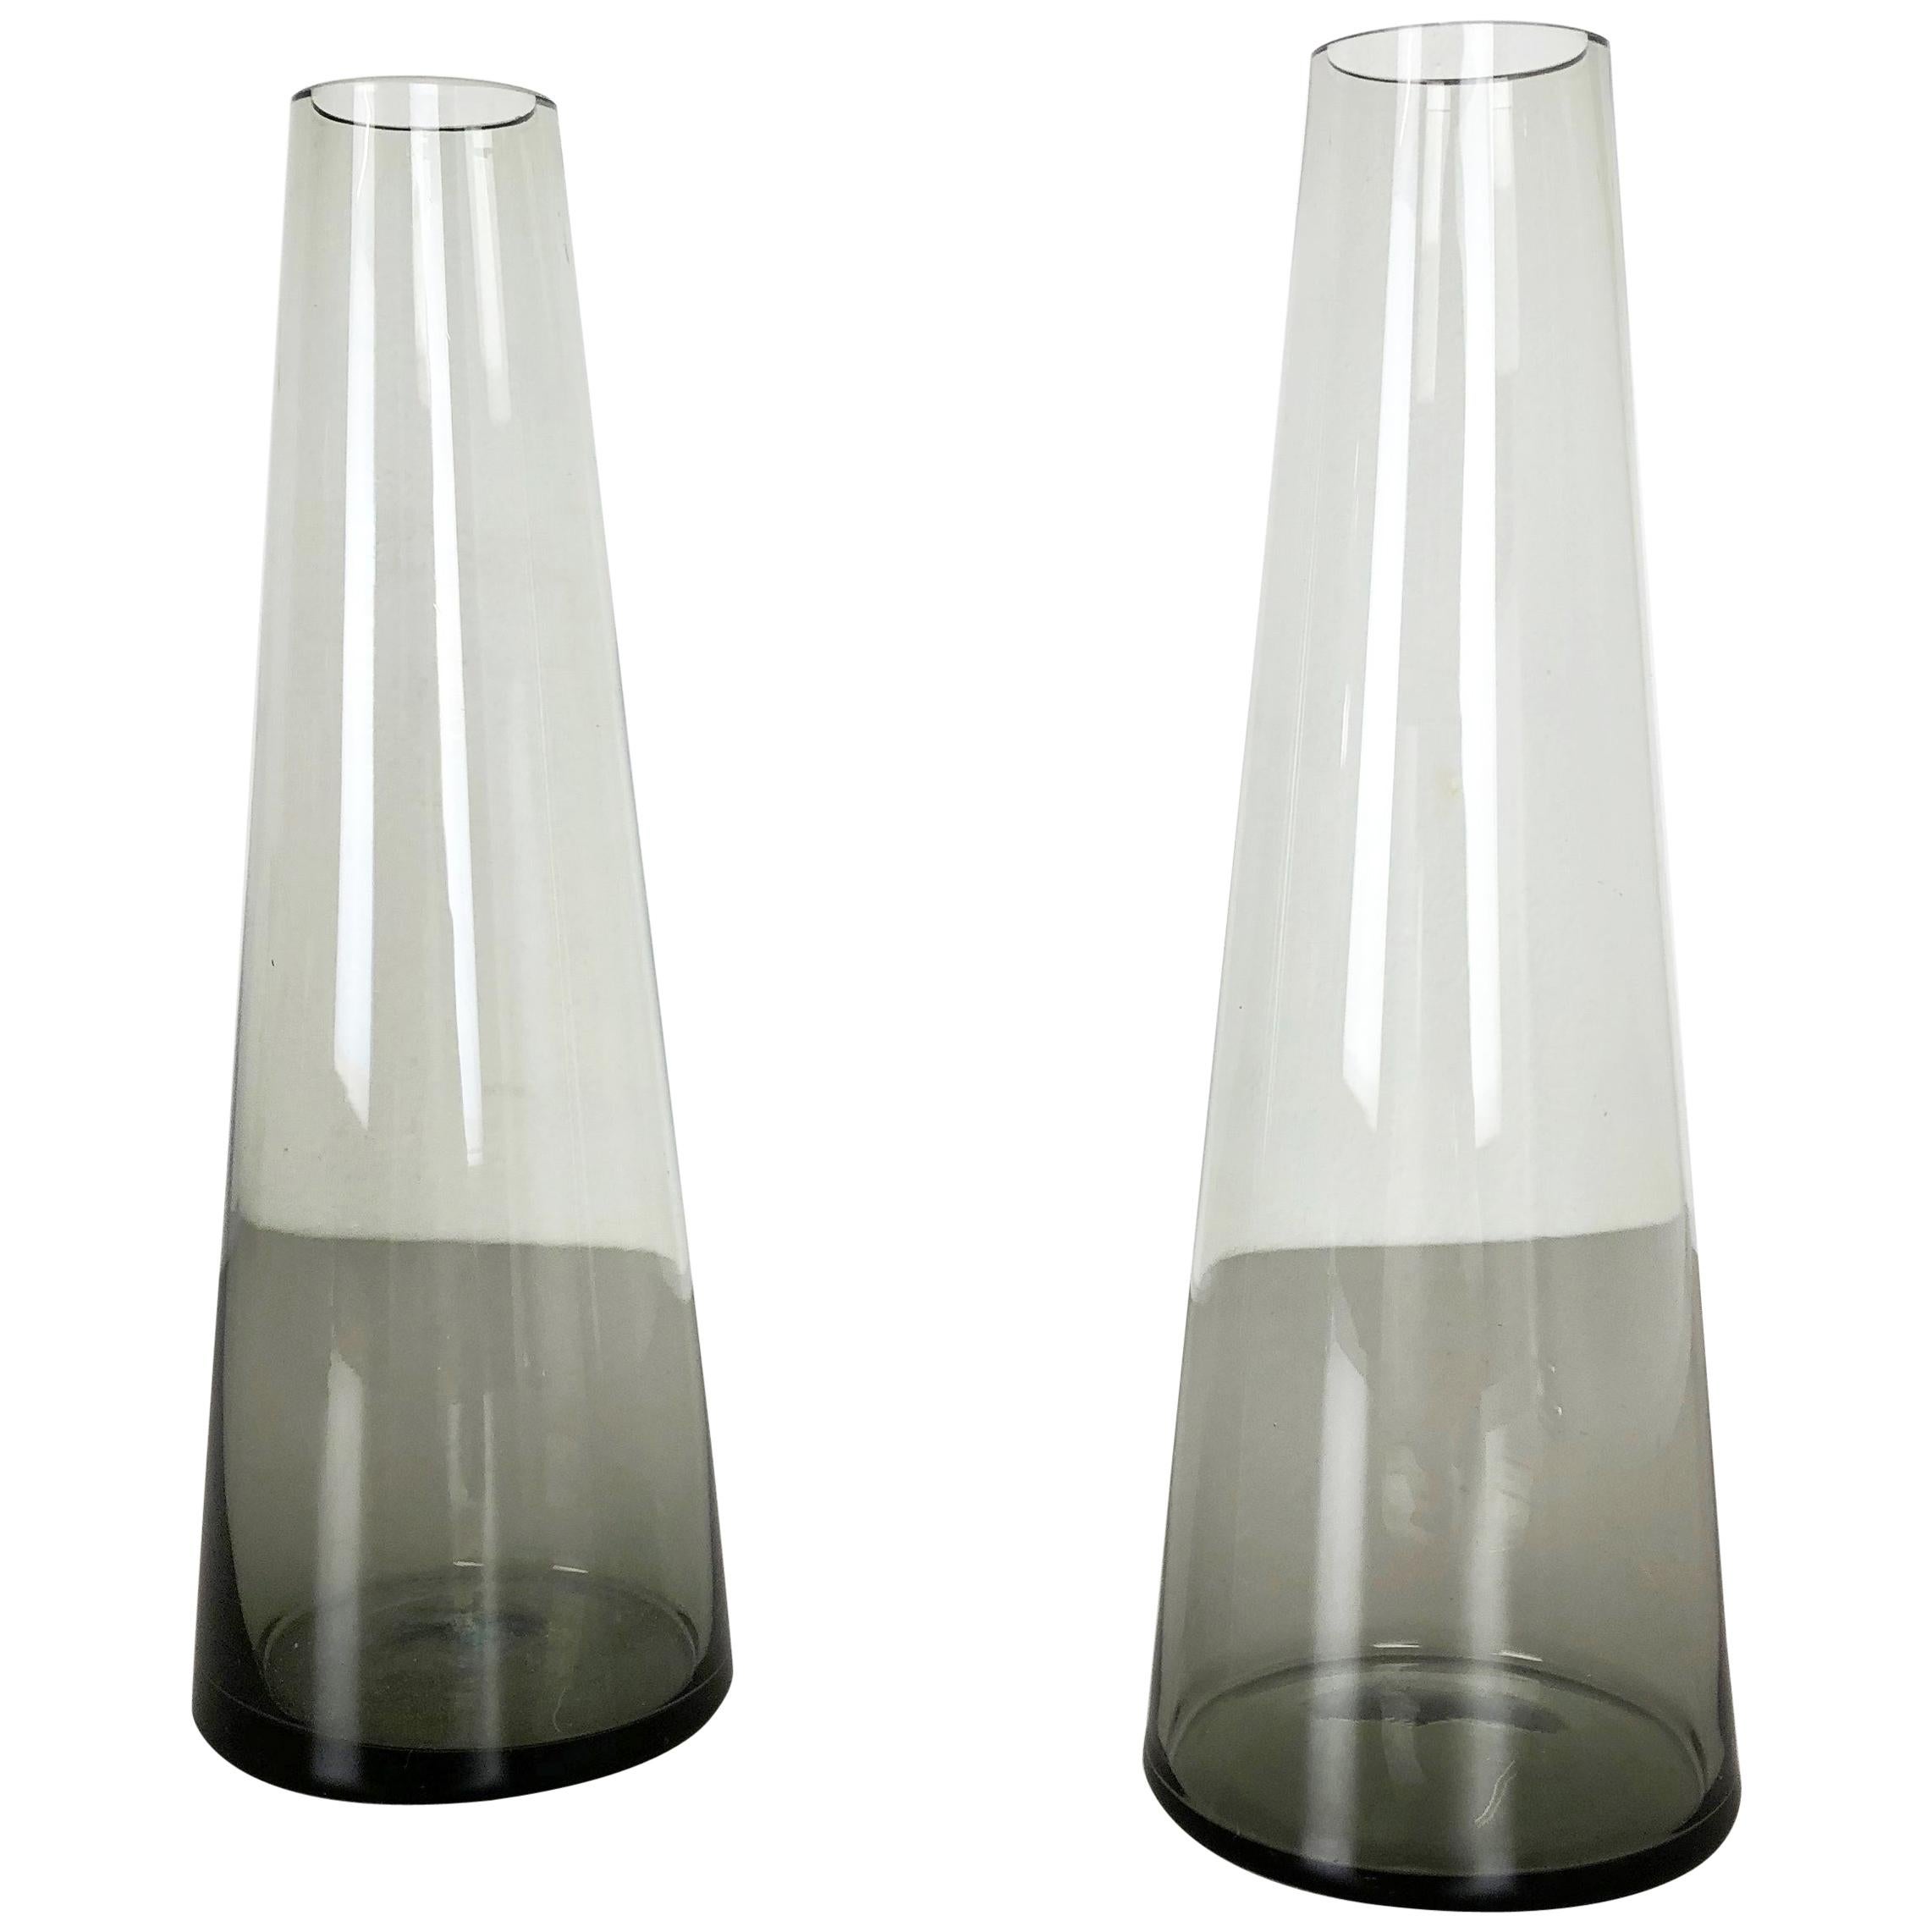 Vintage 1960s Set of 2 Turmalin Vases by Wilhelm Wagenfeld for WMF, Germany For Sale